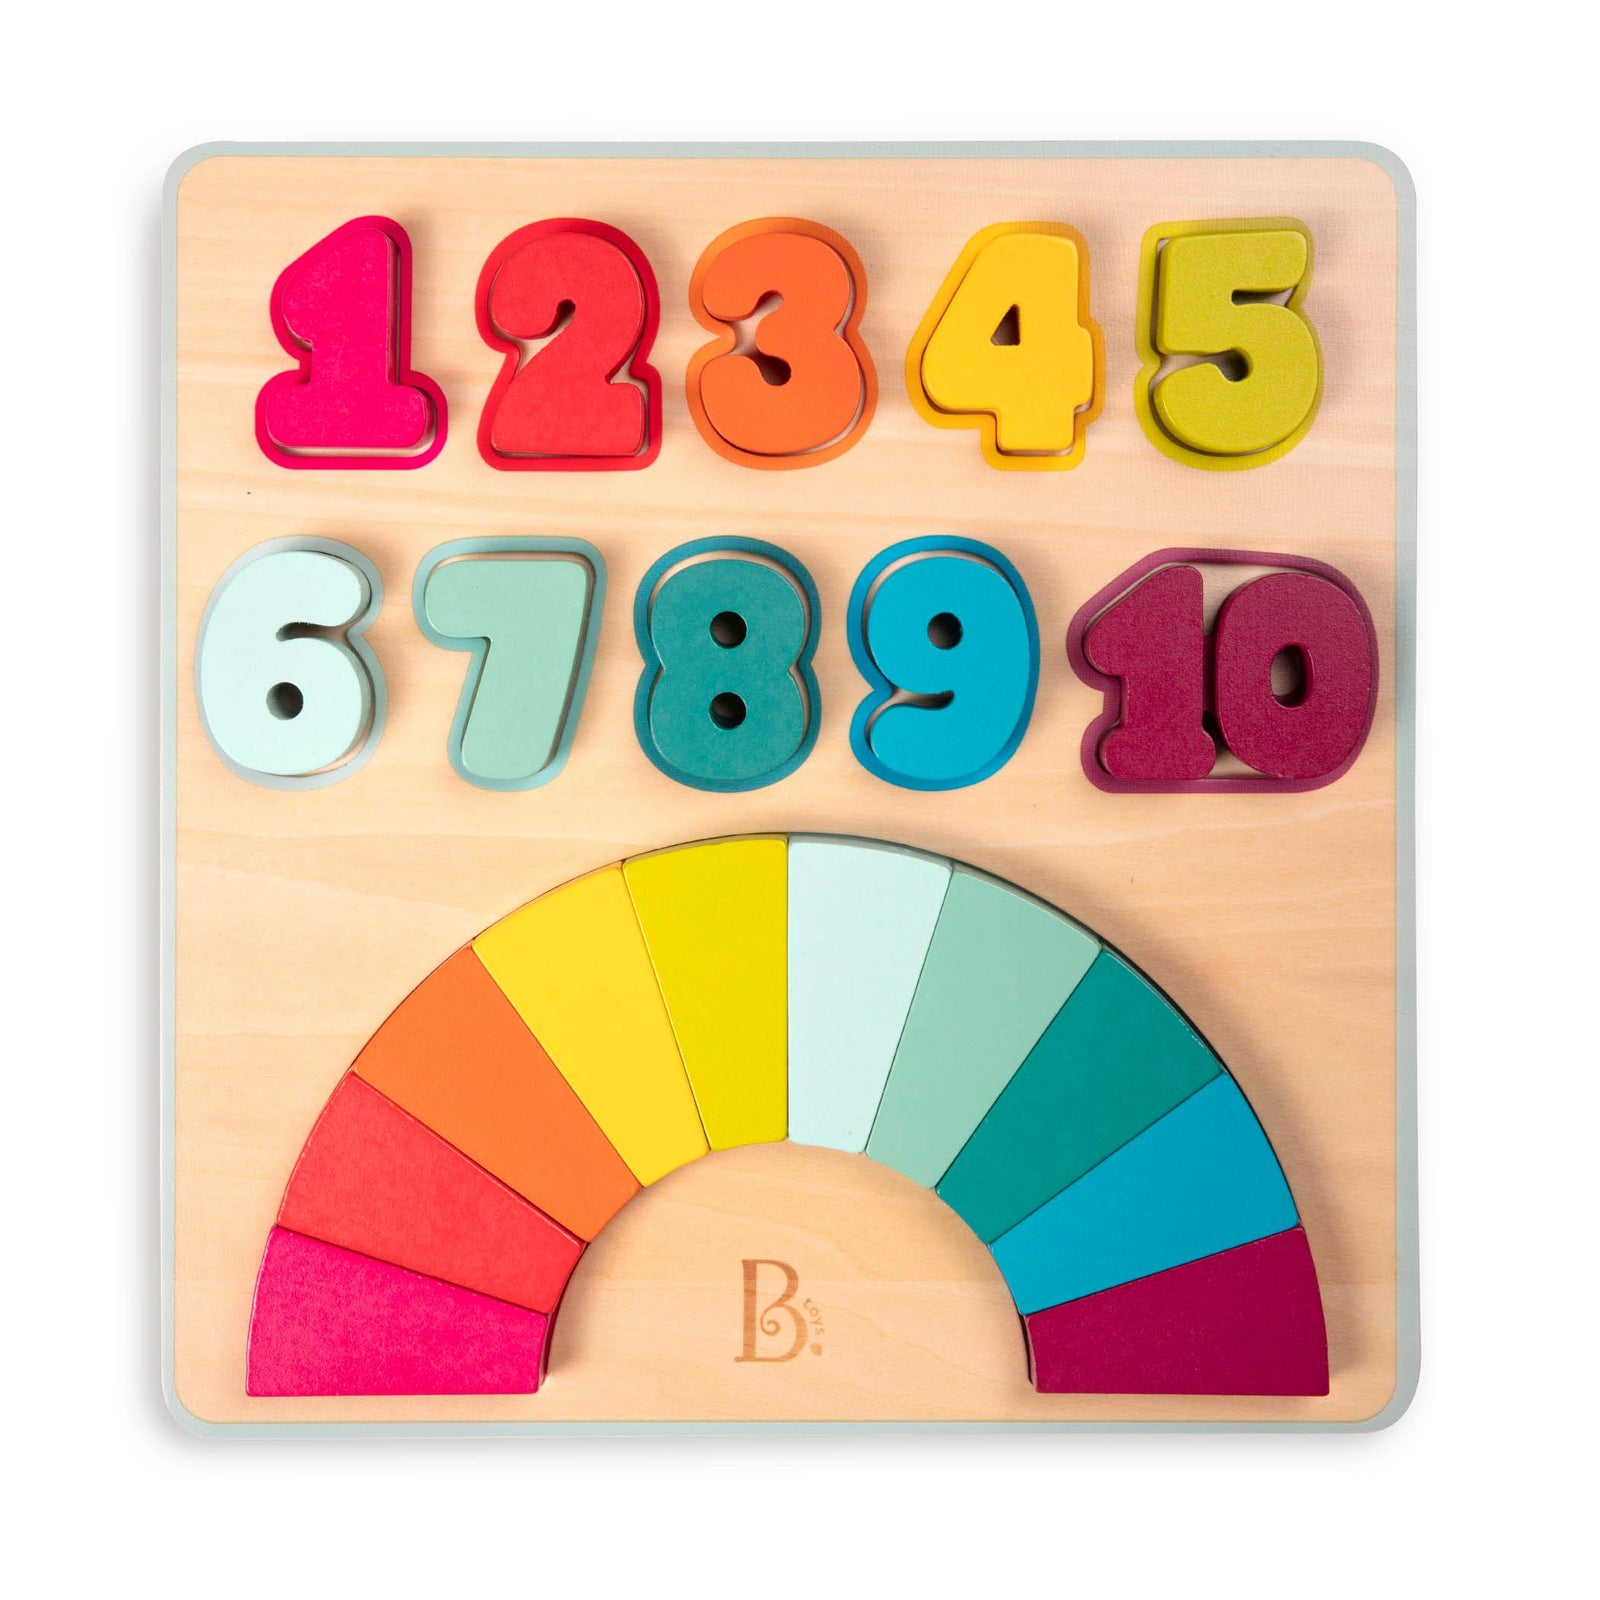 B.Toys: wooden number puzzle Counting Rainbows